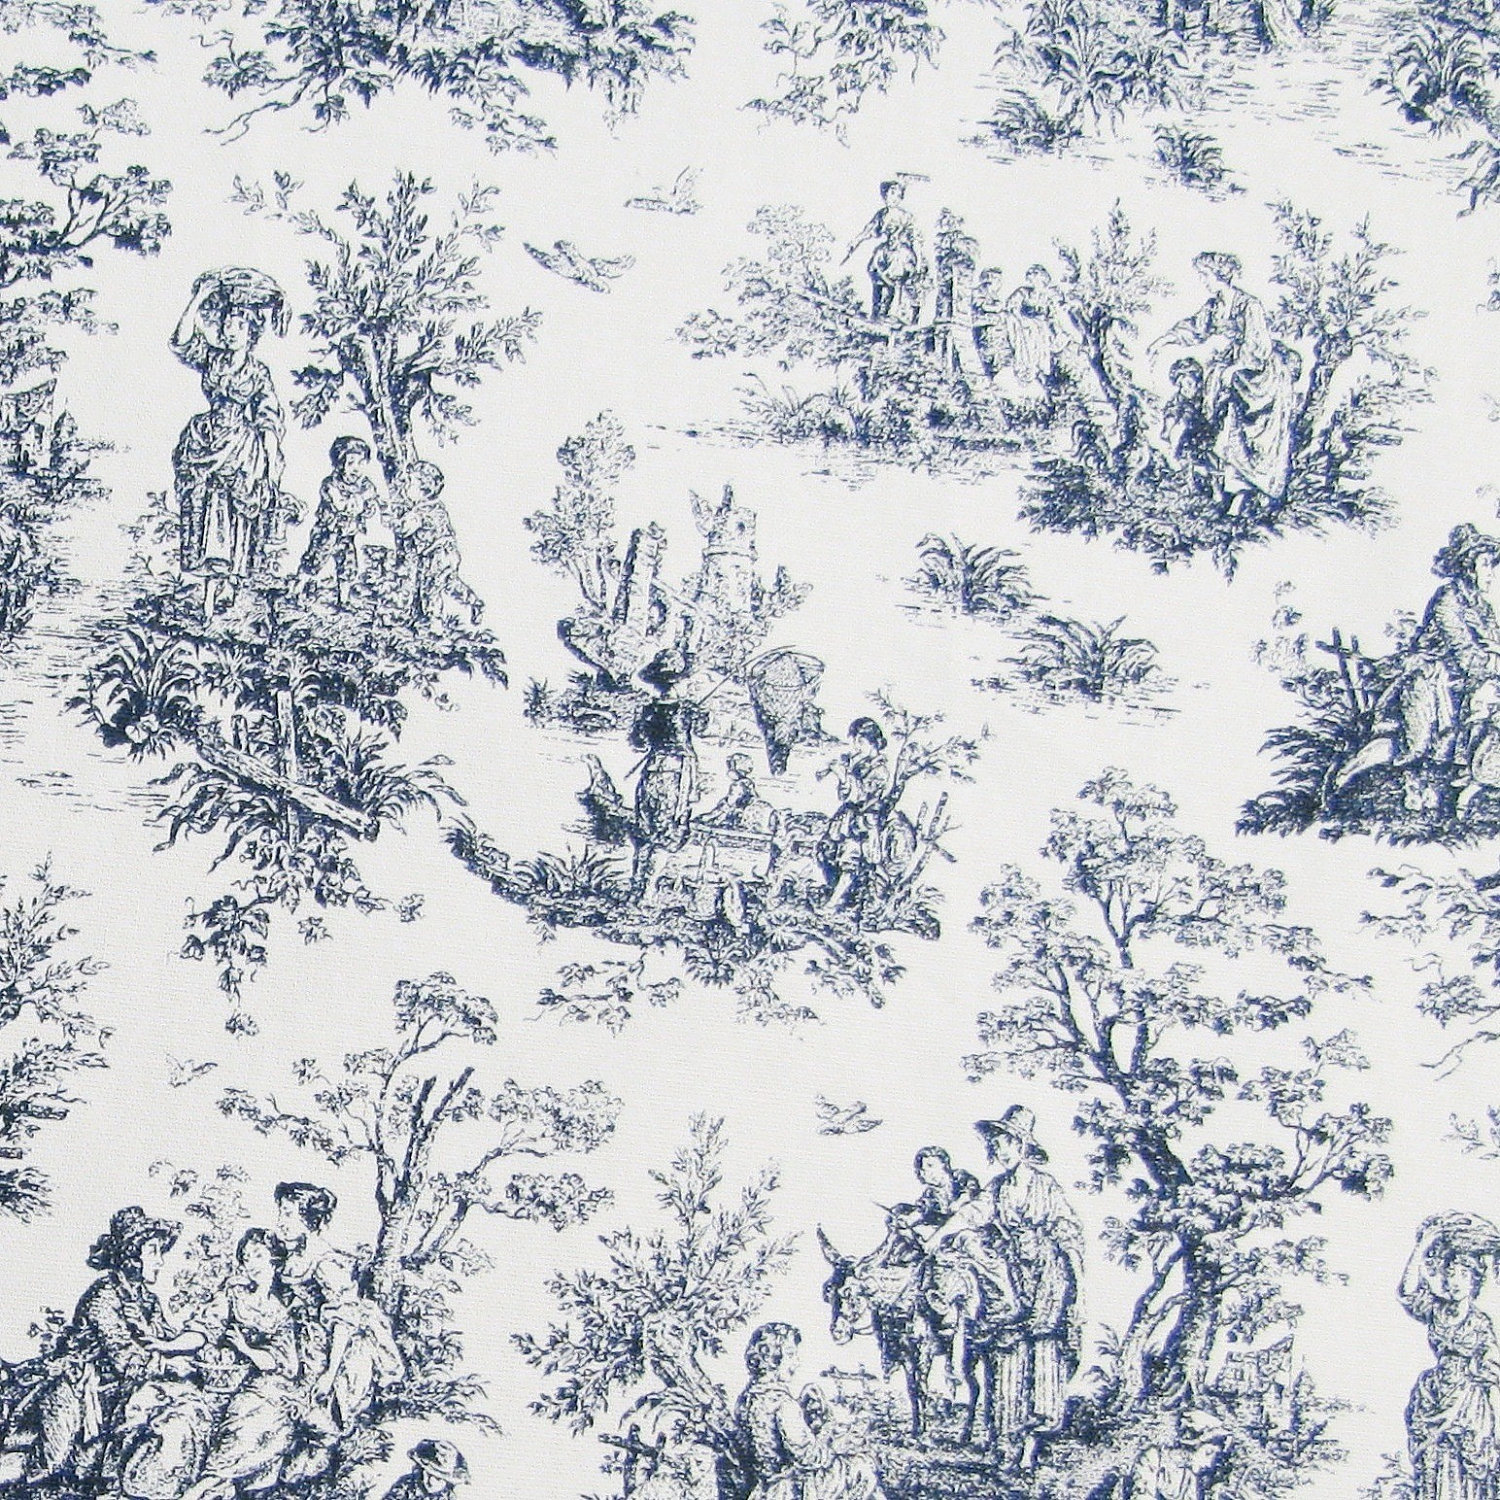 Diy Country Toile At Americanbrowse Blueoyster Htons Sq Heaven